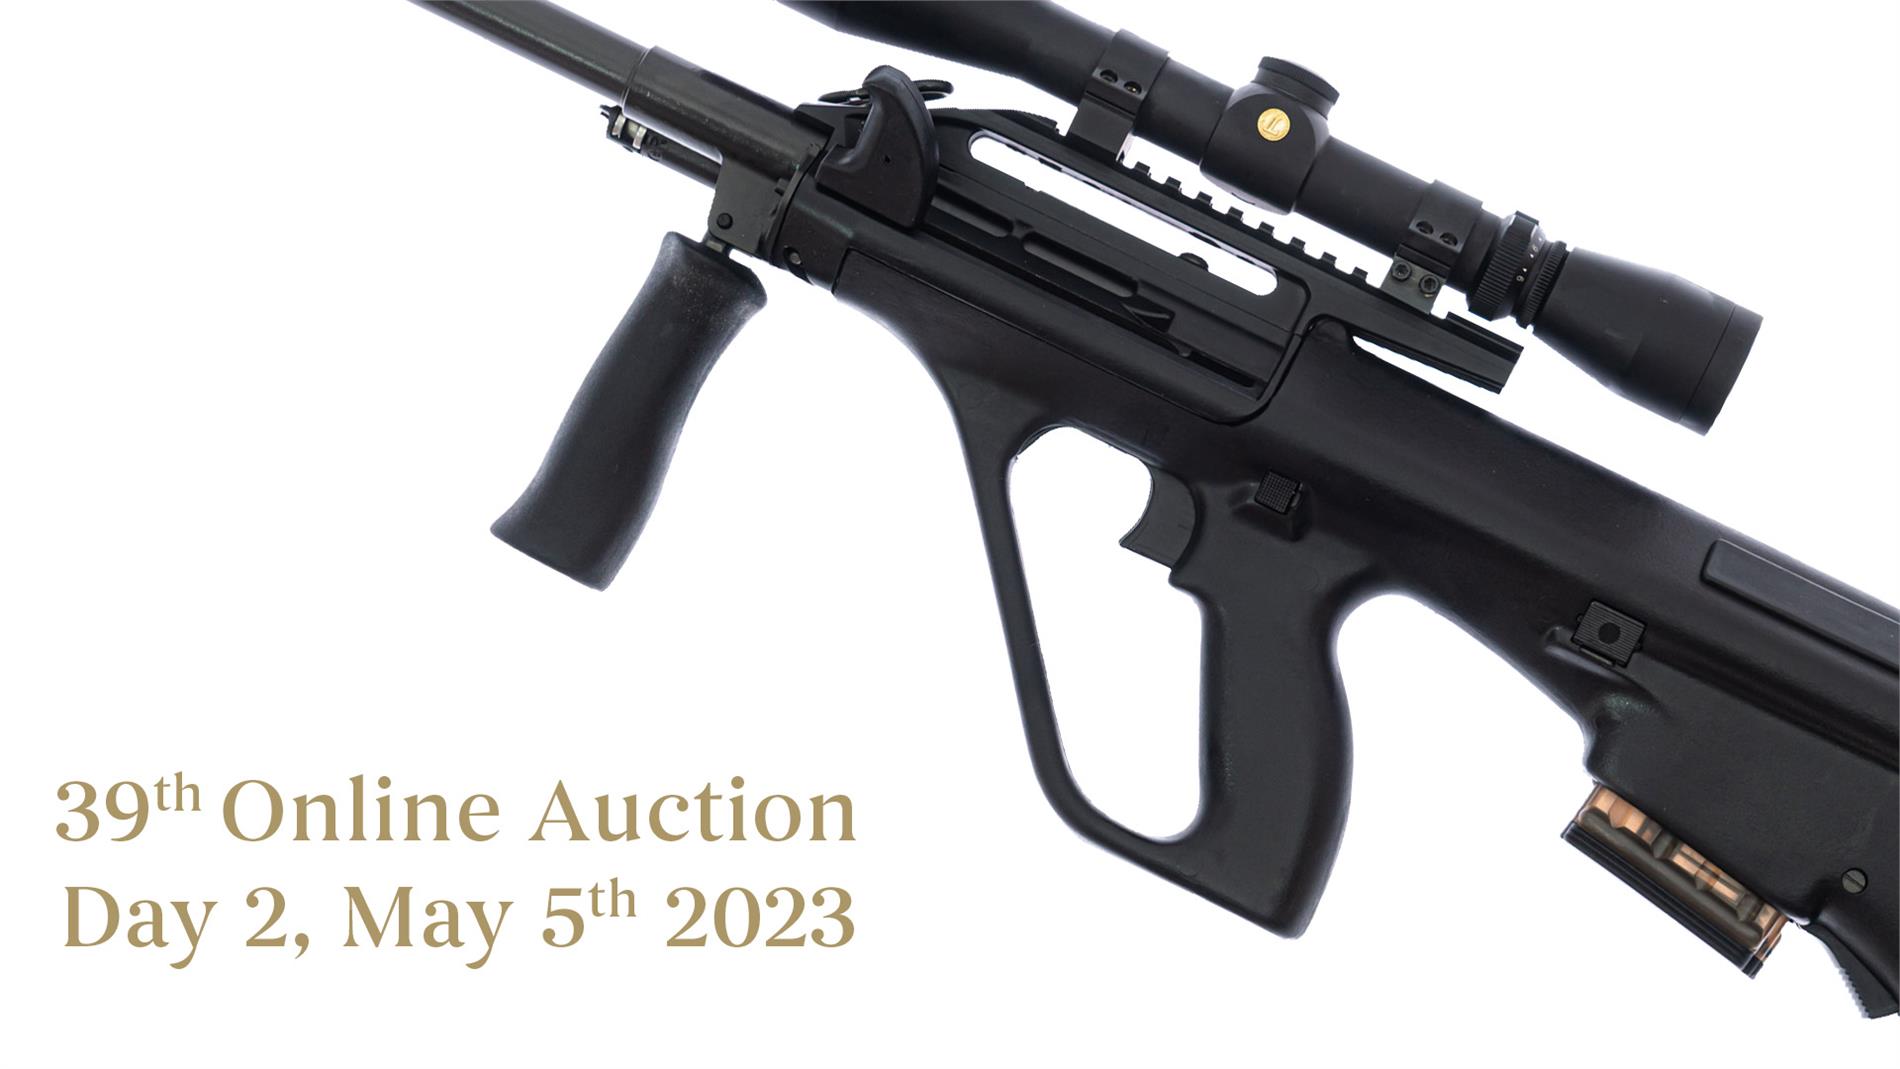 Online Auction (Day 2 of 39th Classic Auction)